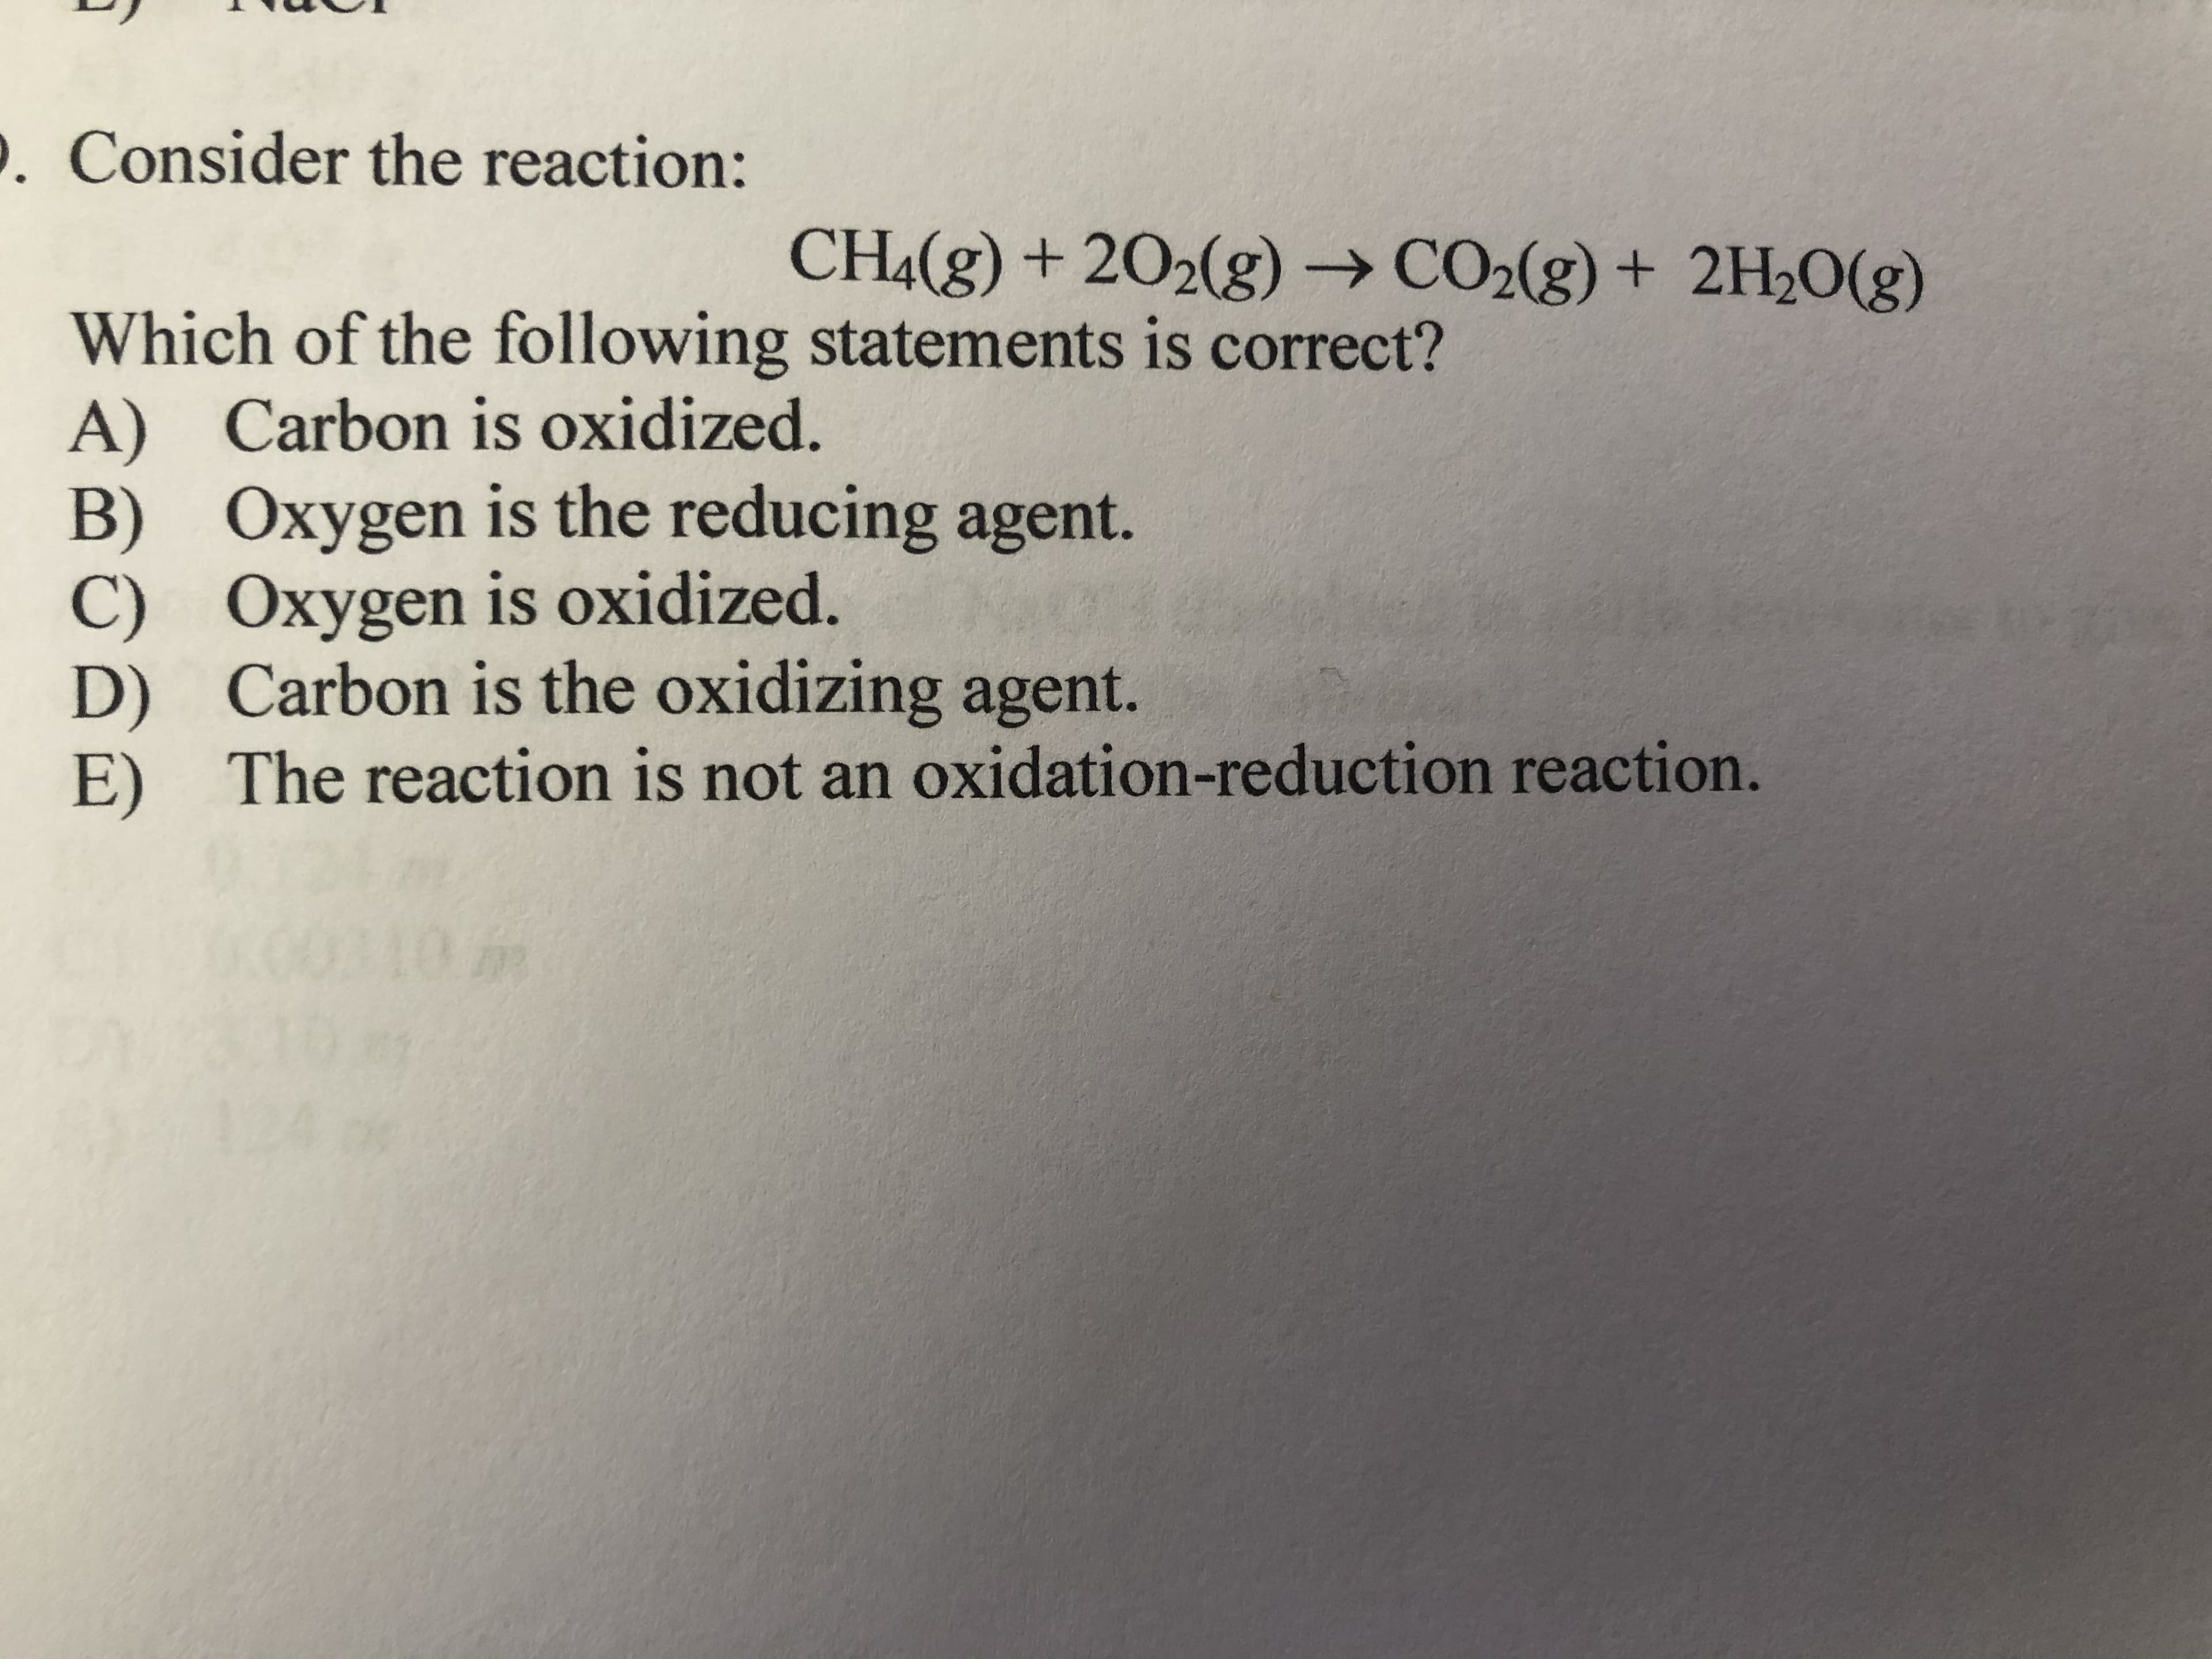 Which of the following statements is correct?
A) Carbon is oxidized.
B) Oxygen is the reducing agent.
C) Oxygen is oxidized.
D) Carbon is the oxidizing agent.
E) The reaction is not an oxidation-reduction reaction.
